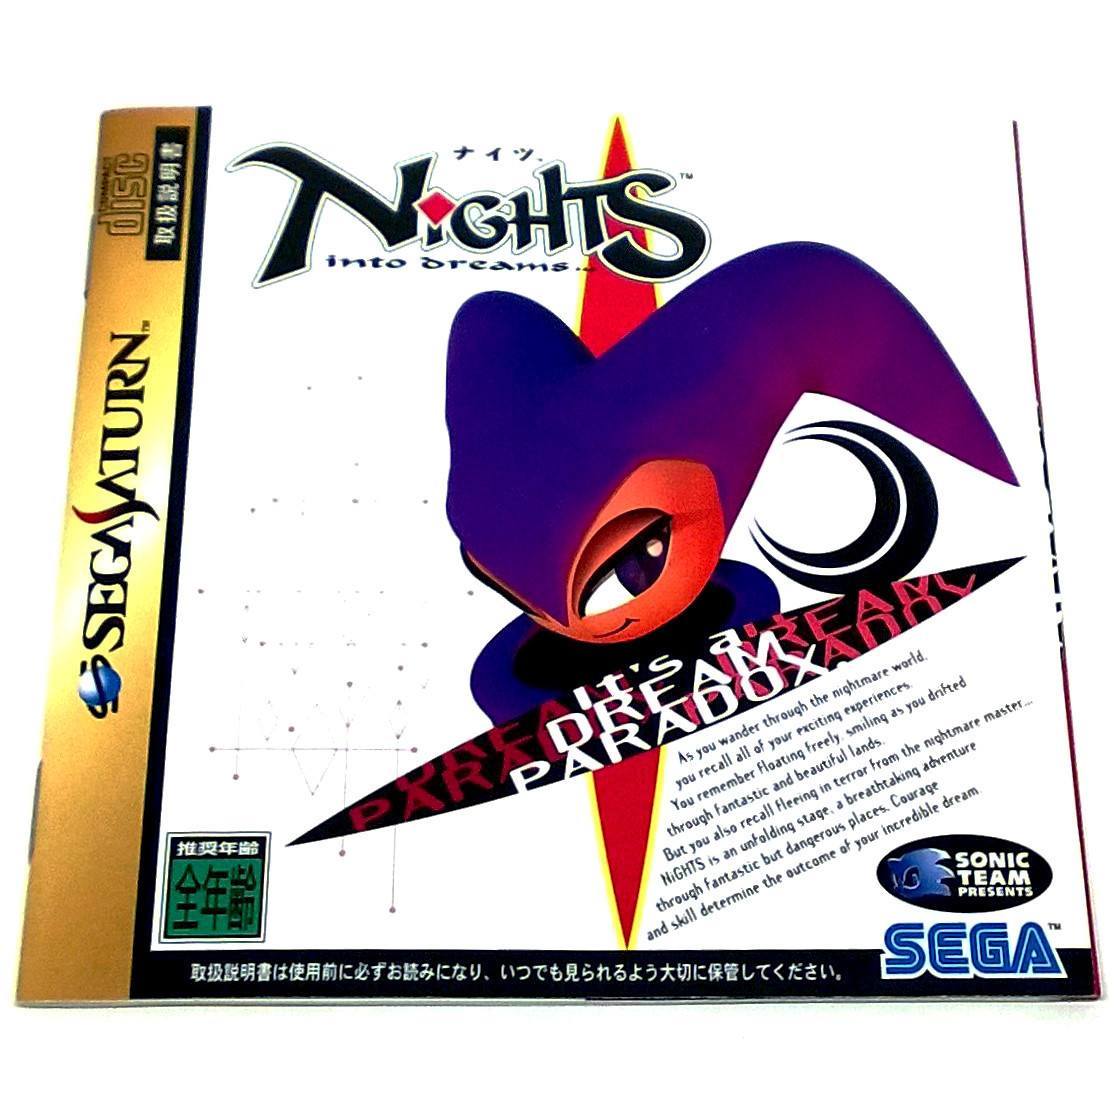 Nights Into Dreams... for Saturn (import) - Front of manual